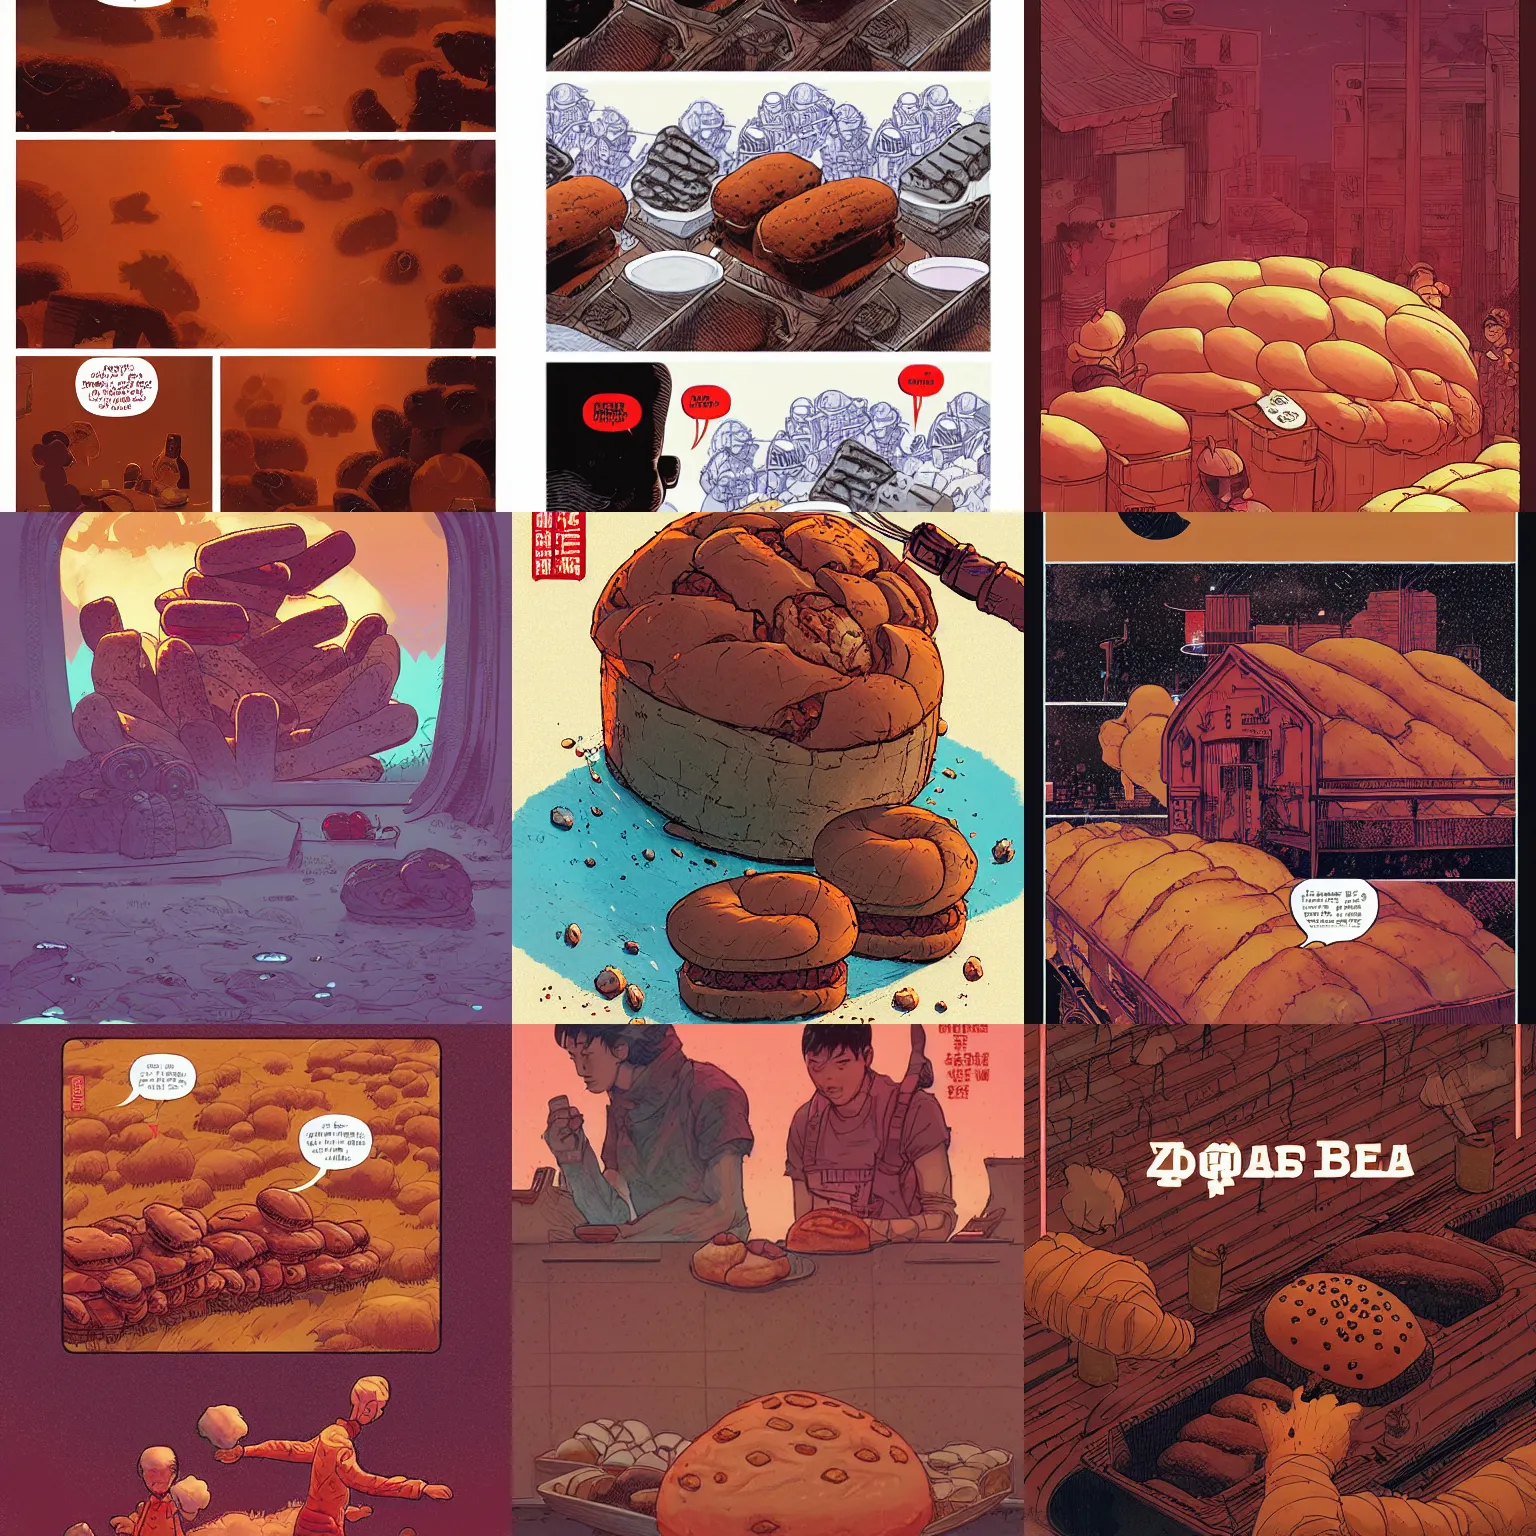 Prompt: poop bread, by feng zhu, loish, laurie greasley, victo ngai, andreas rocha, john harris